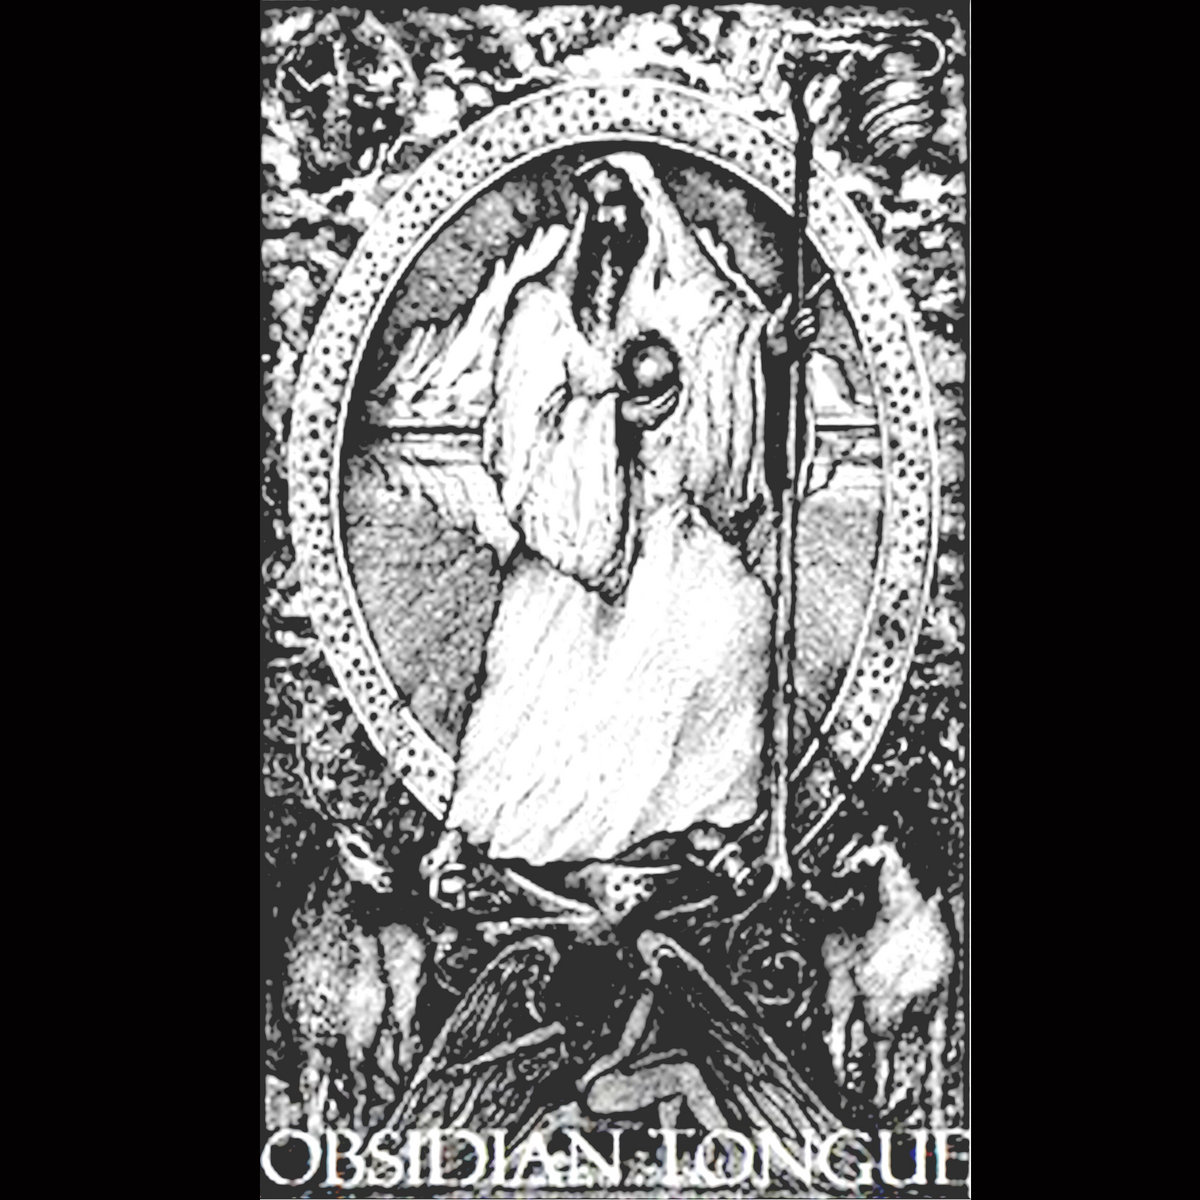 OBSIDIAN TONGUE - 2010 Demo cover 